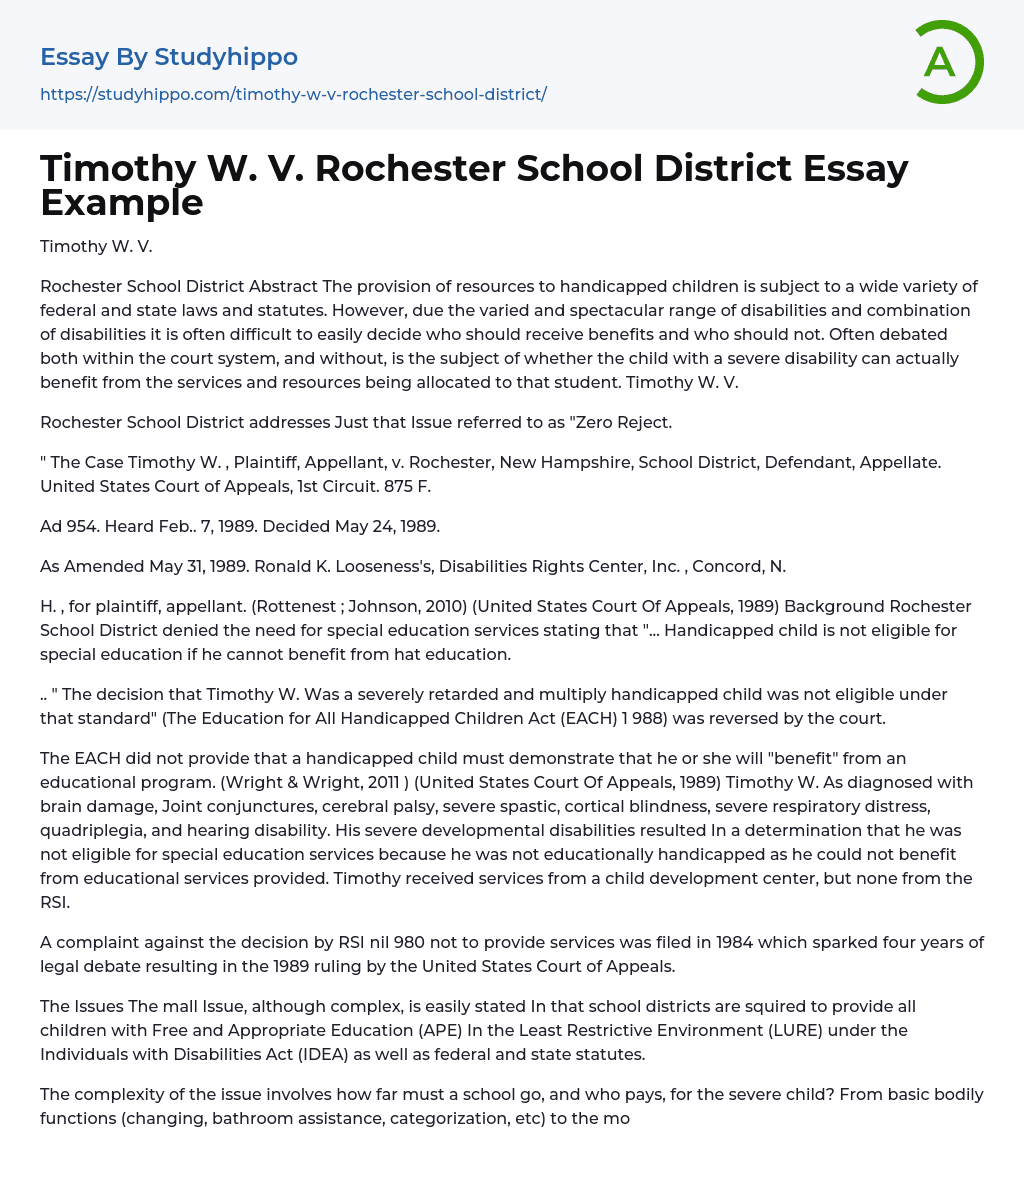 Timothy W. V. Rochester School District Essay Example